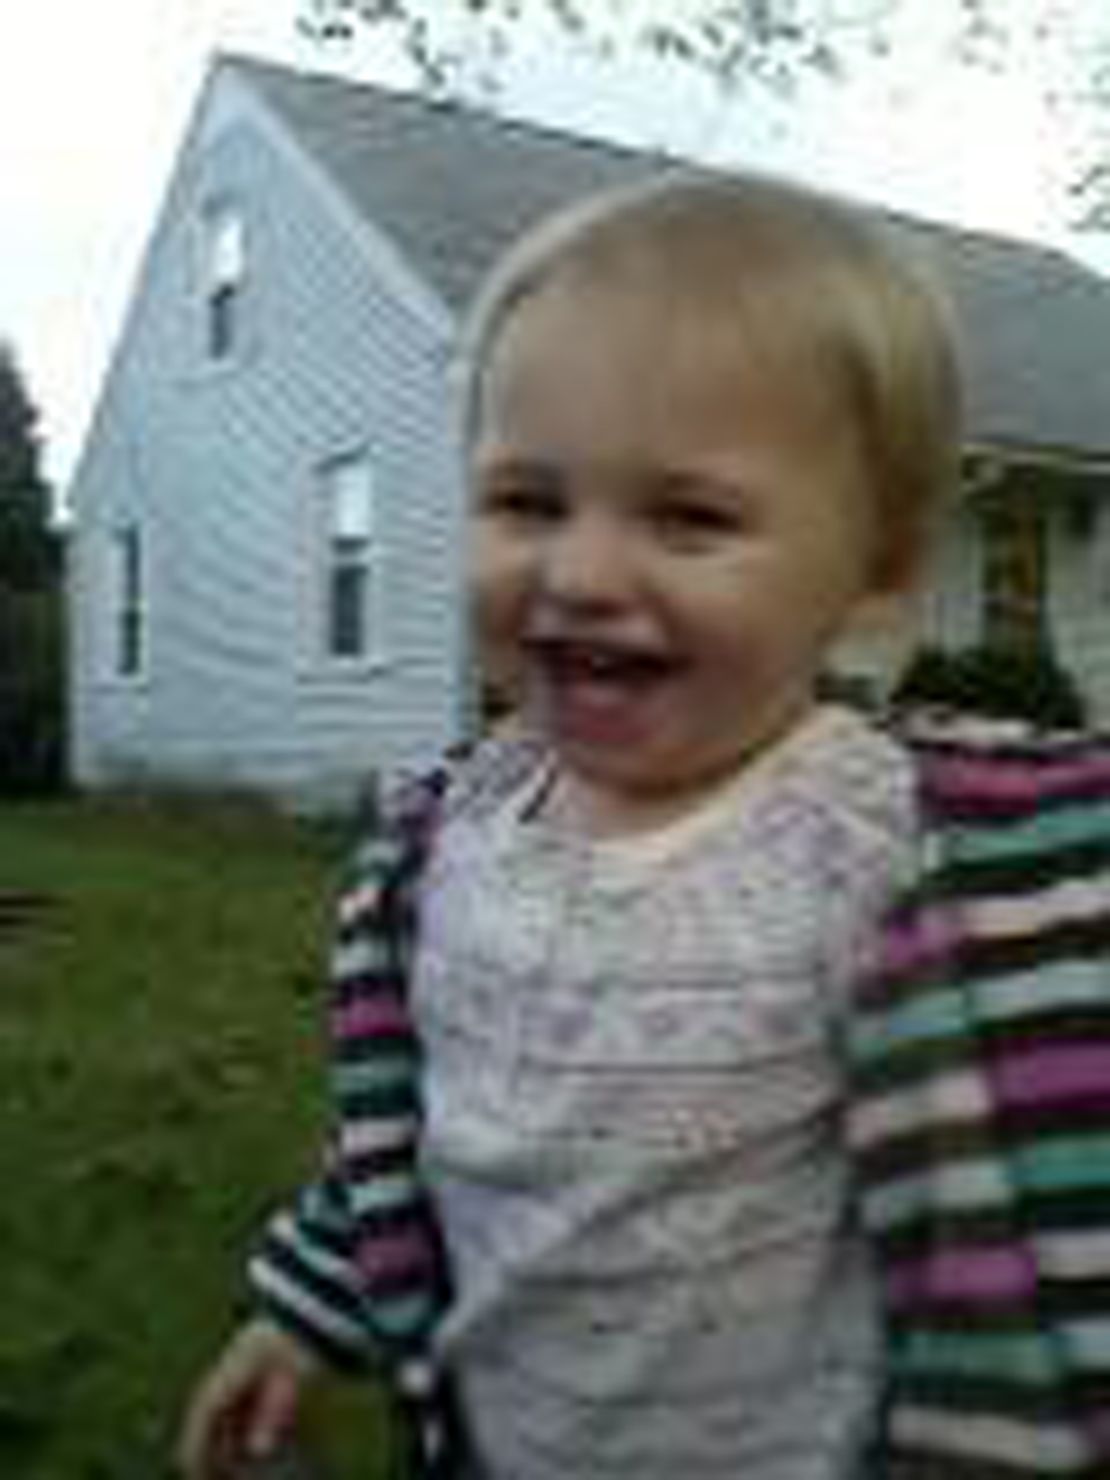 A $30,000 reward has been offered in the search for 20-month-old Ayla Reynolds.